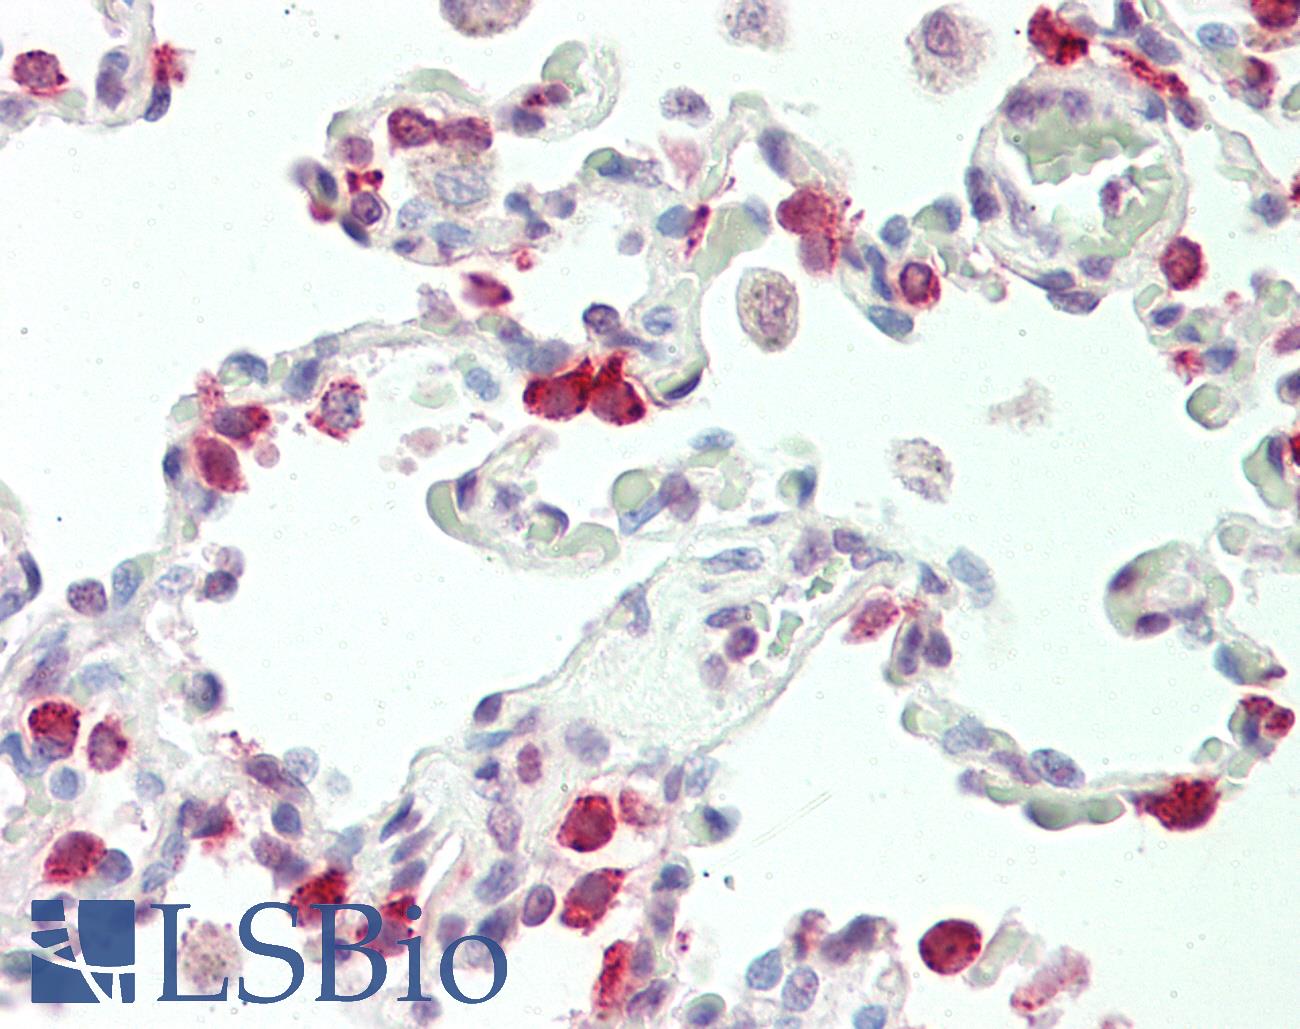 SFTPC / Surfactant Protein C Antibody - Anti-SFTPC / Surfactant Protein C antibody IHC staining of human lung. Immunohistochemistry of formalin-fixed, paraffin-embedded tissue after heat-induced antigen retrieval. Antibody dilution 1:100.